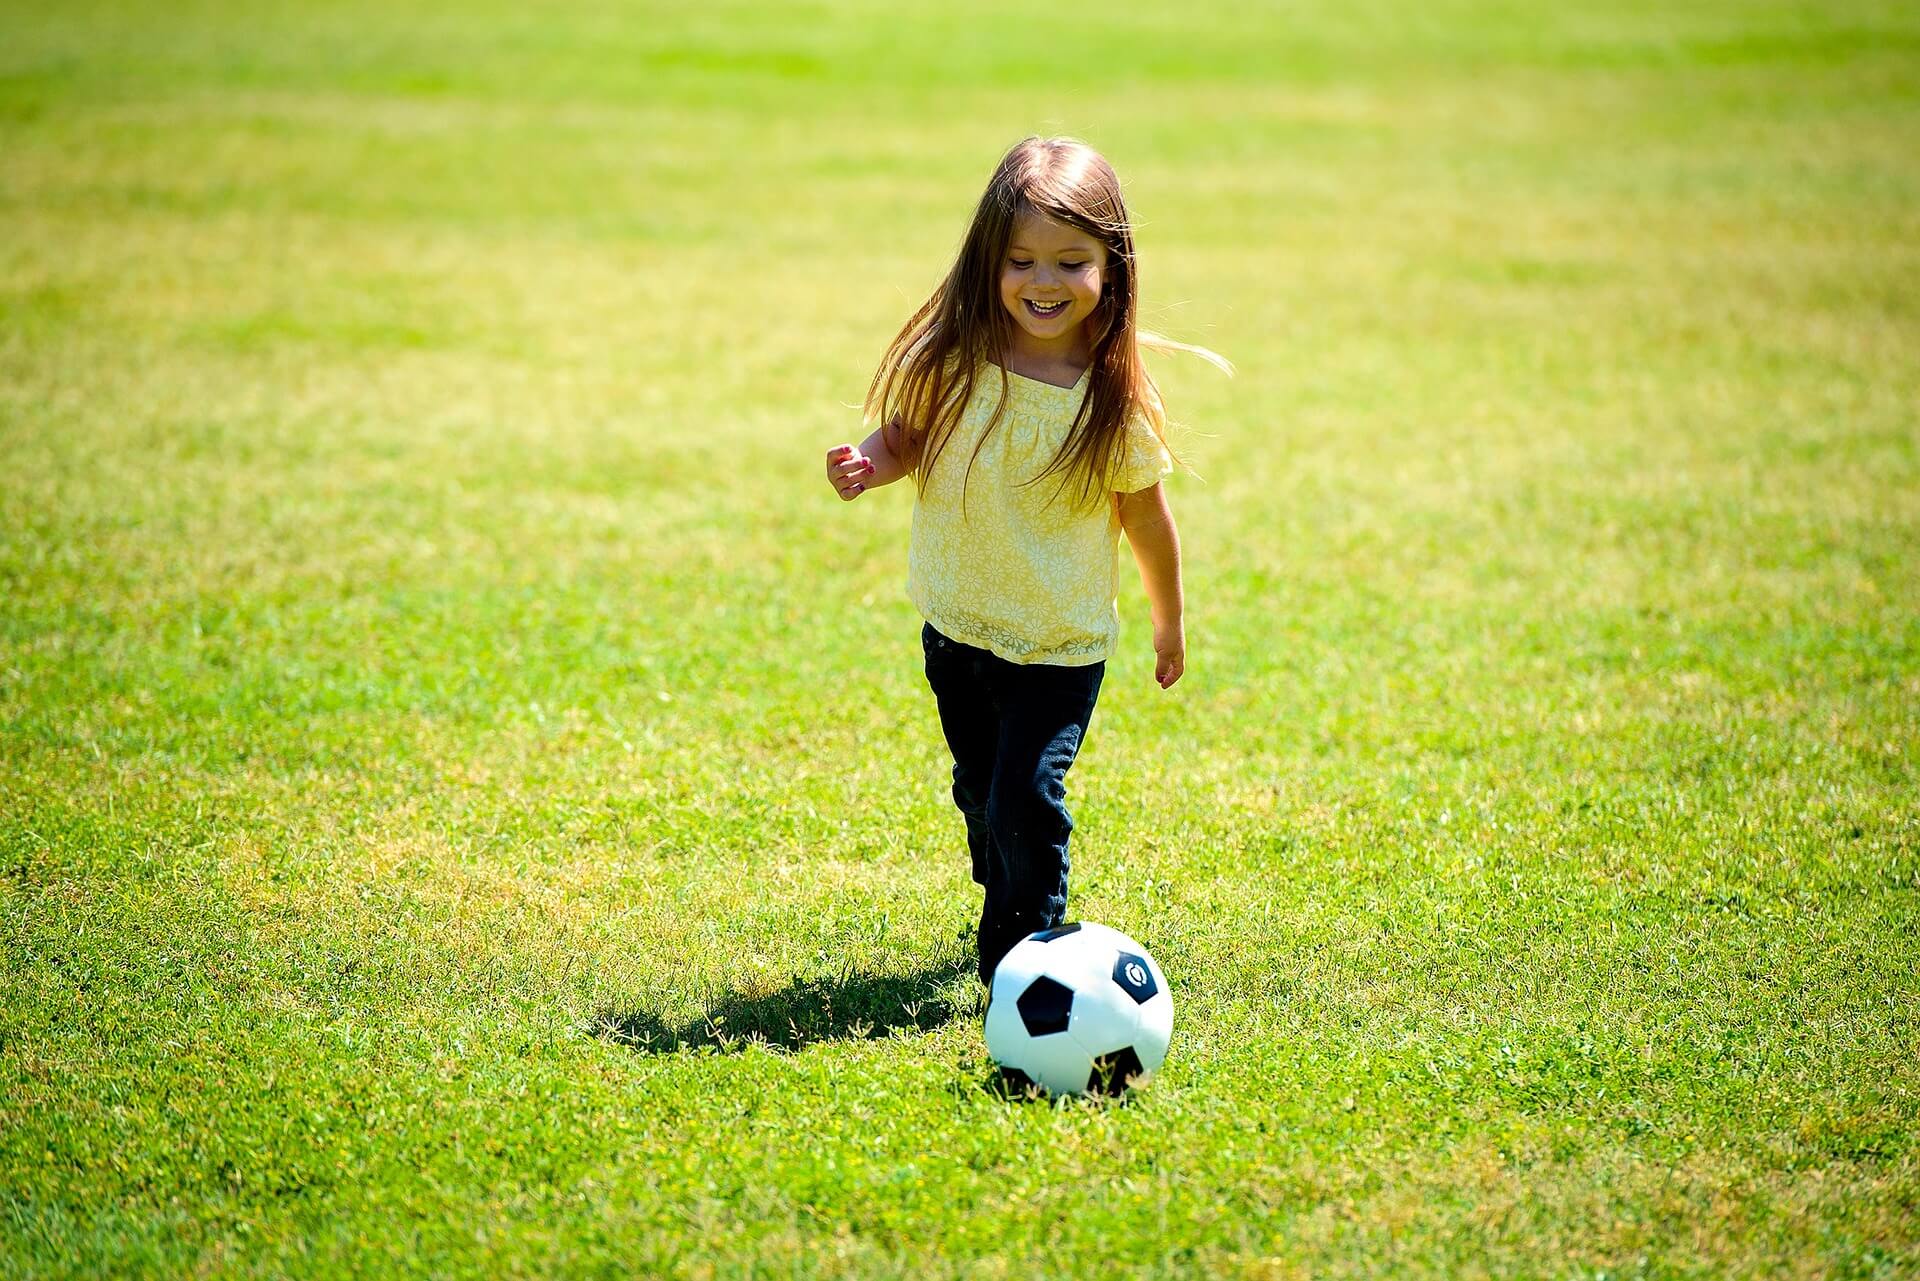 5 Simple Ways to Encourage More Playtime